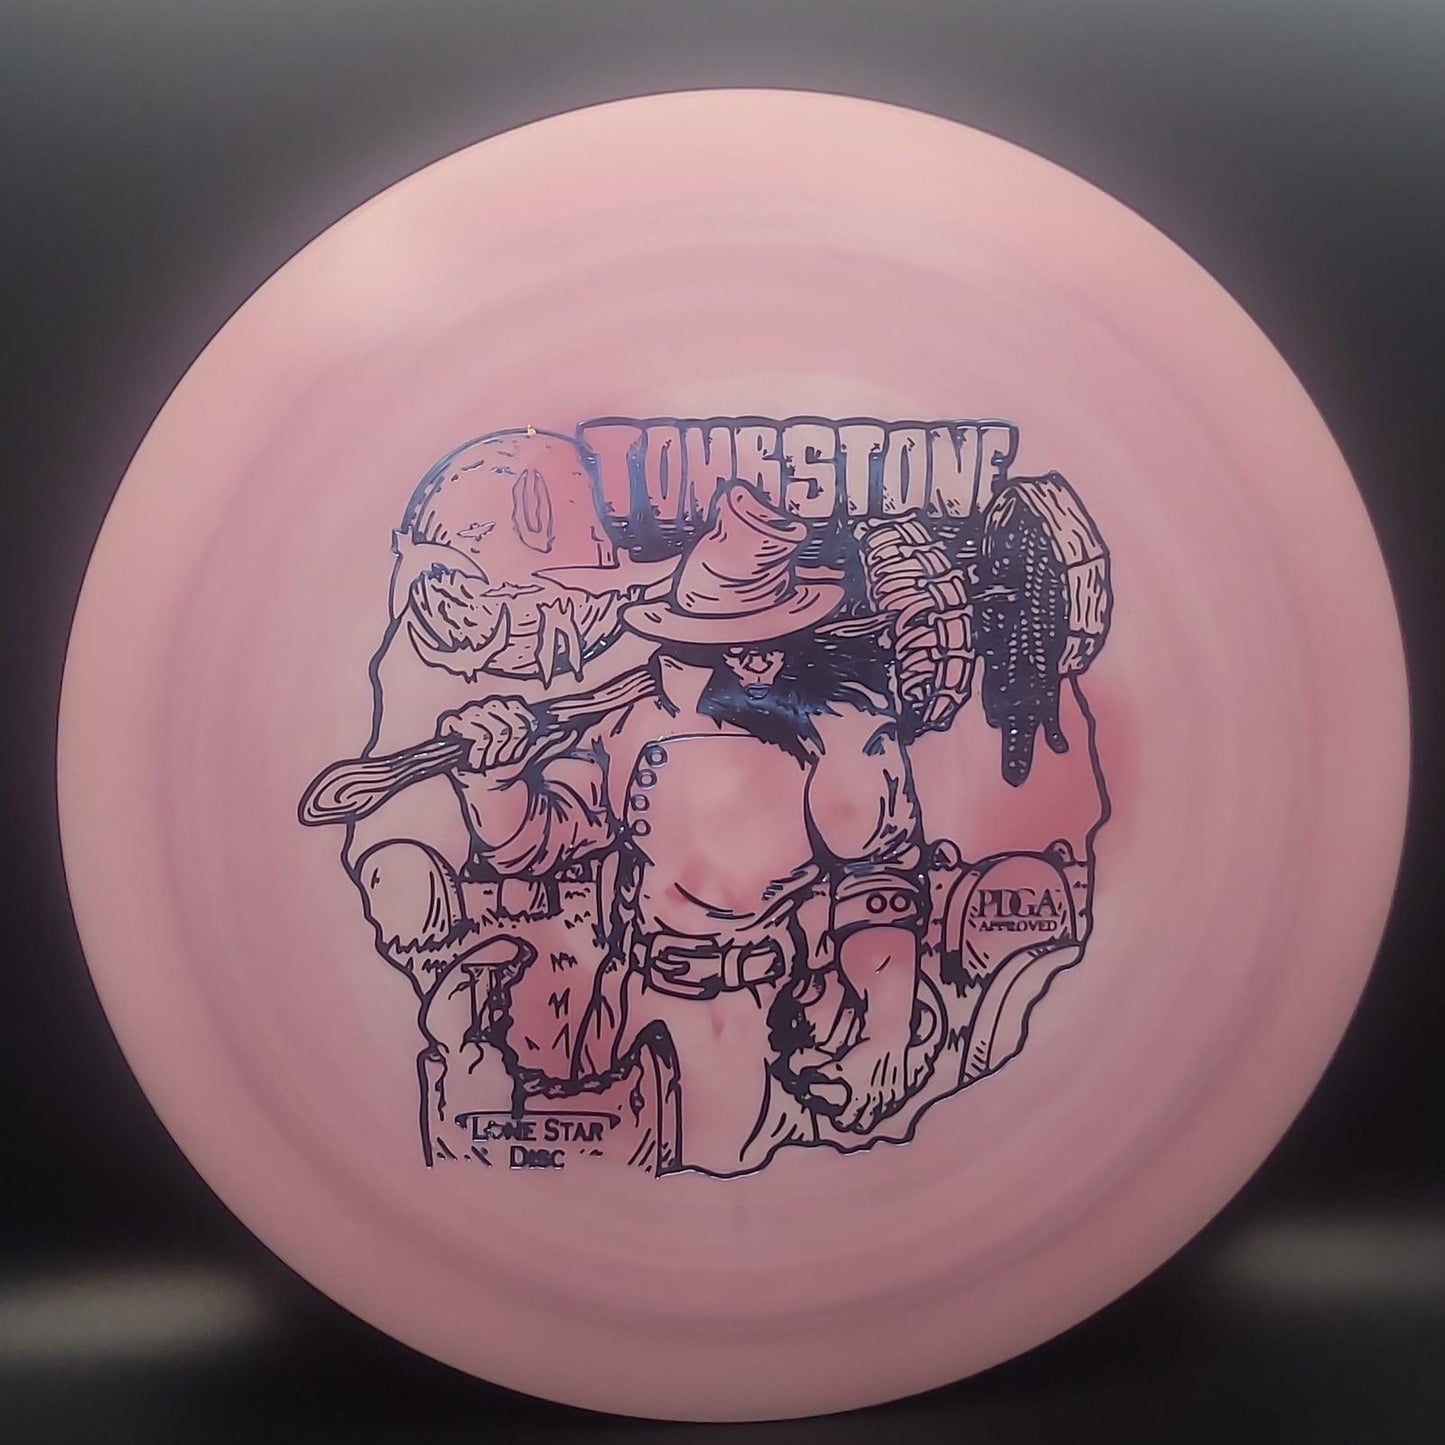 Alpha Tombstone - Utility Driver Lone Star Discs